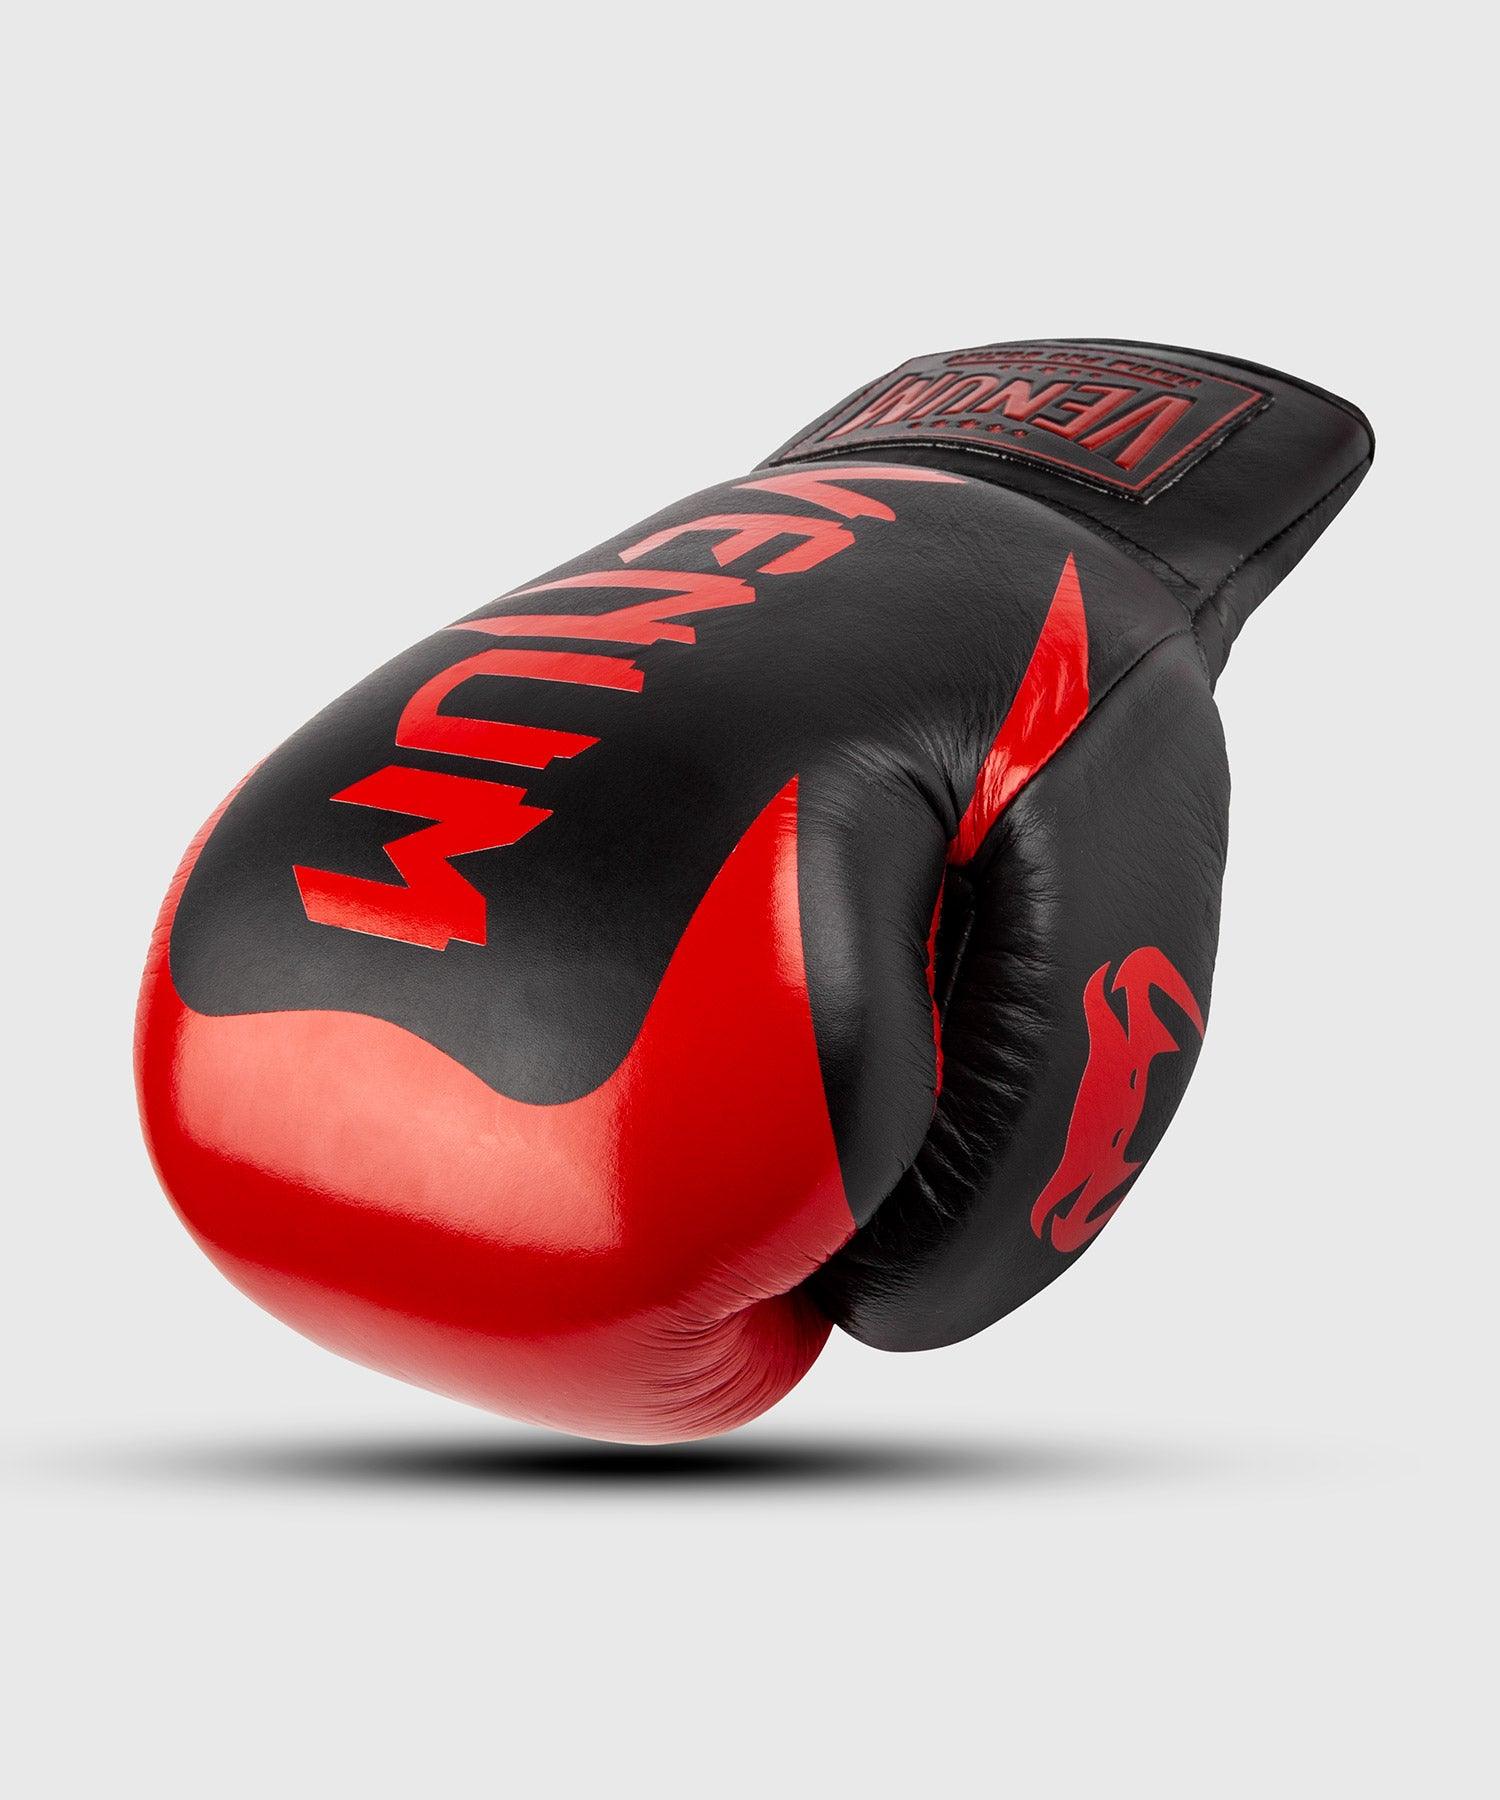 Venum Hammer Pro Boxing Gloves - With Laces - Black/Red Picture 1